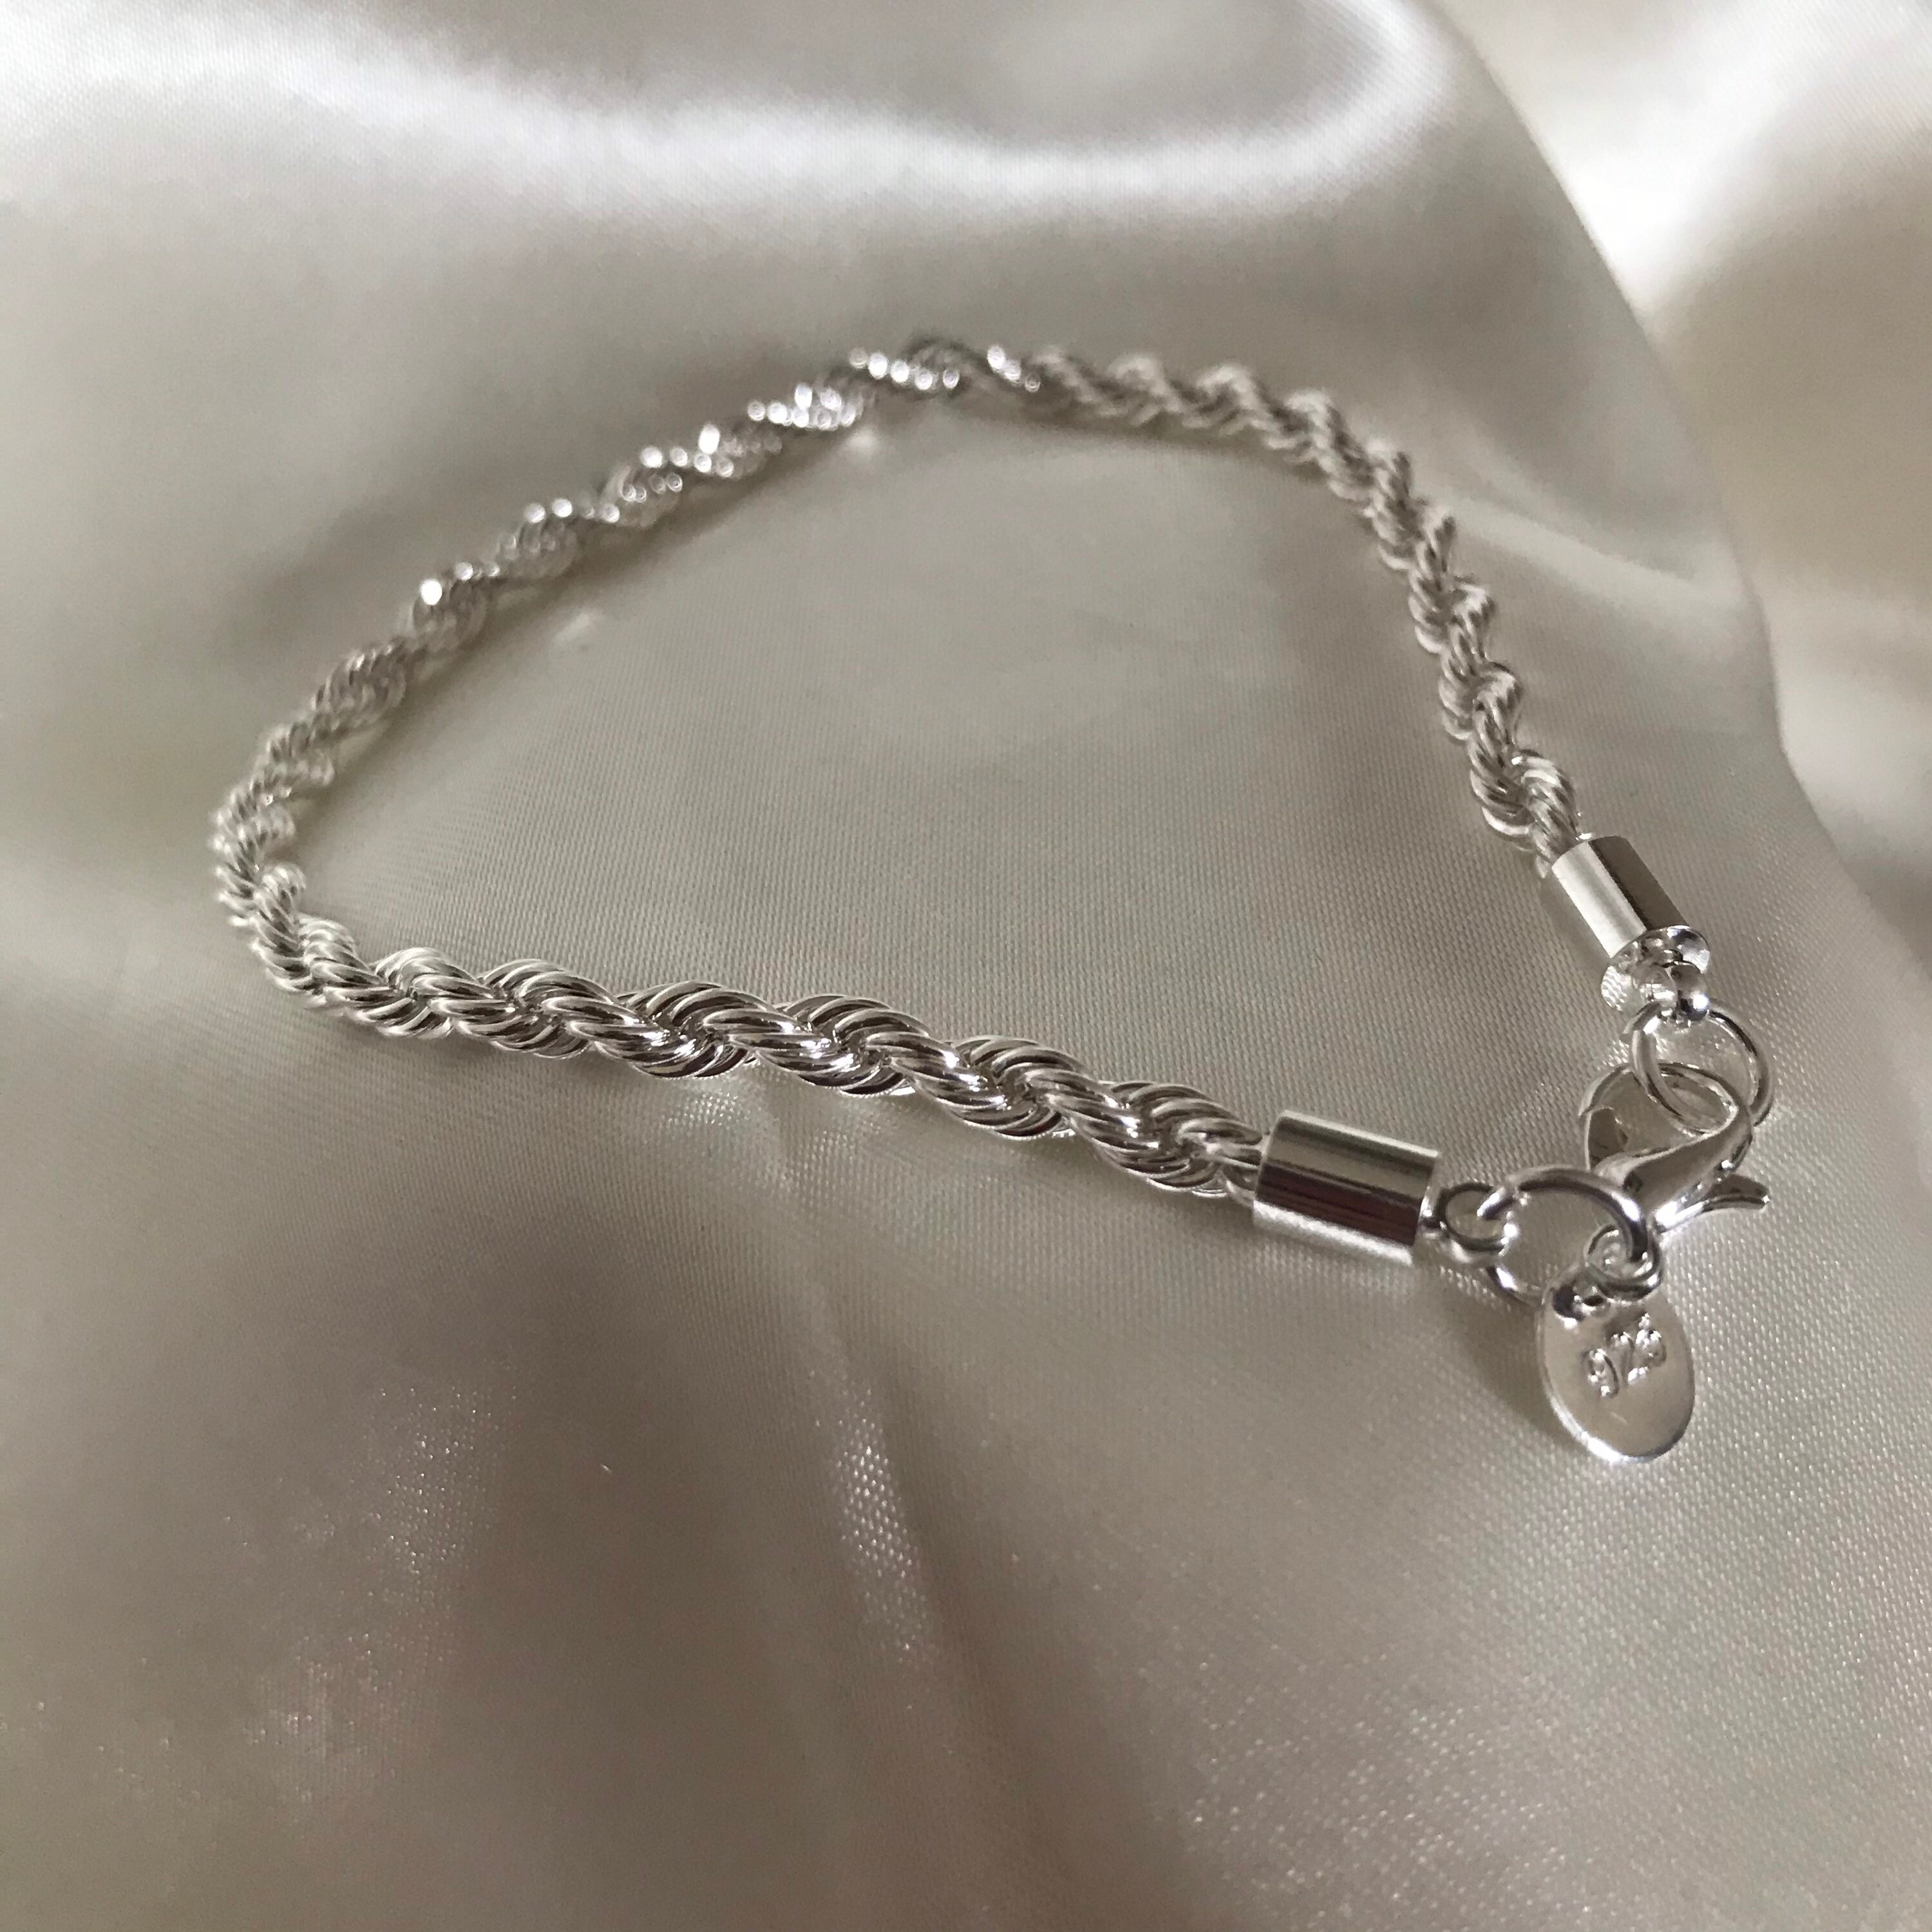 Silver Rope Chain Bracelet Sterling Silver Rope Chain | Etsy